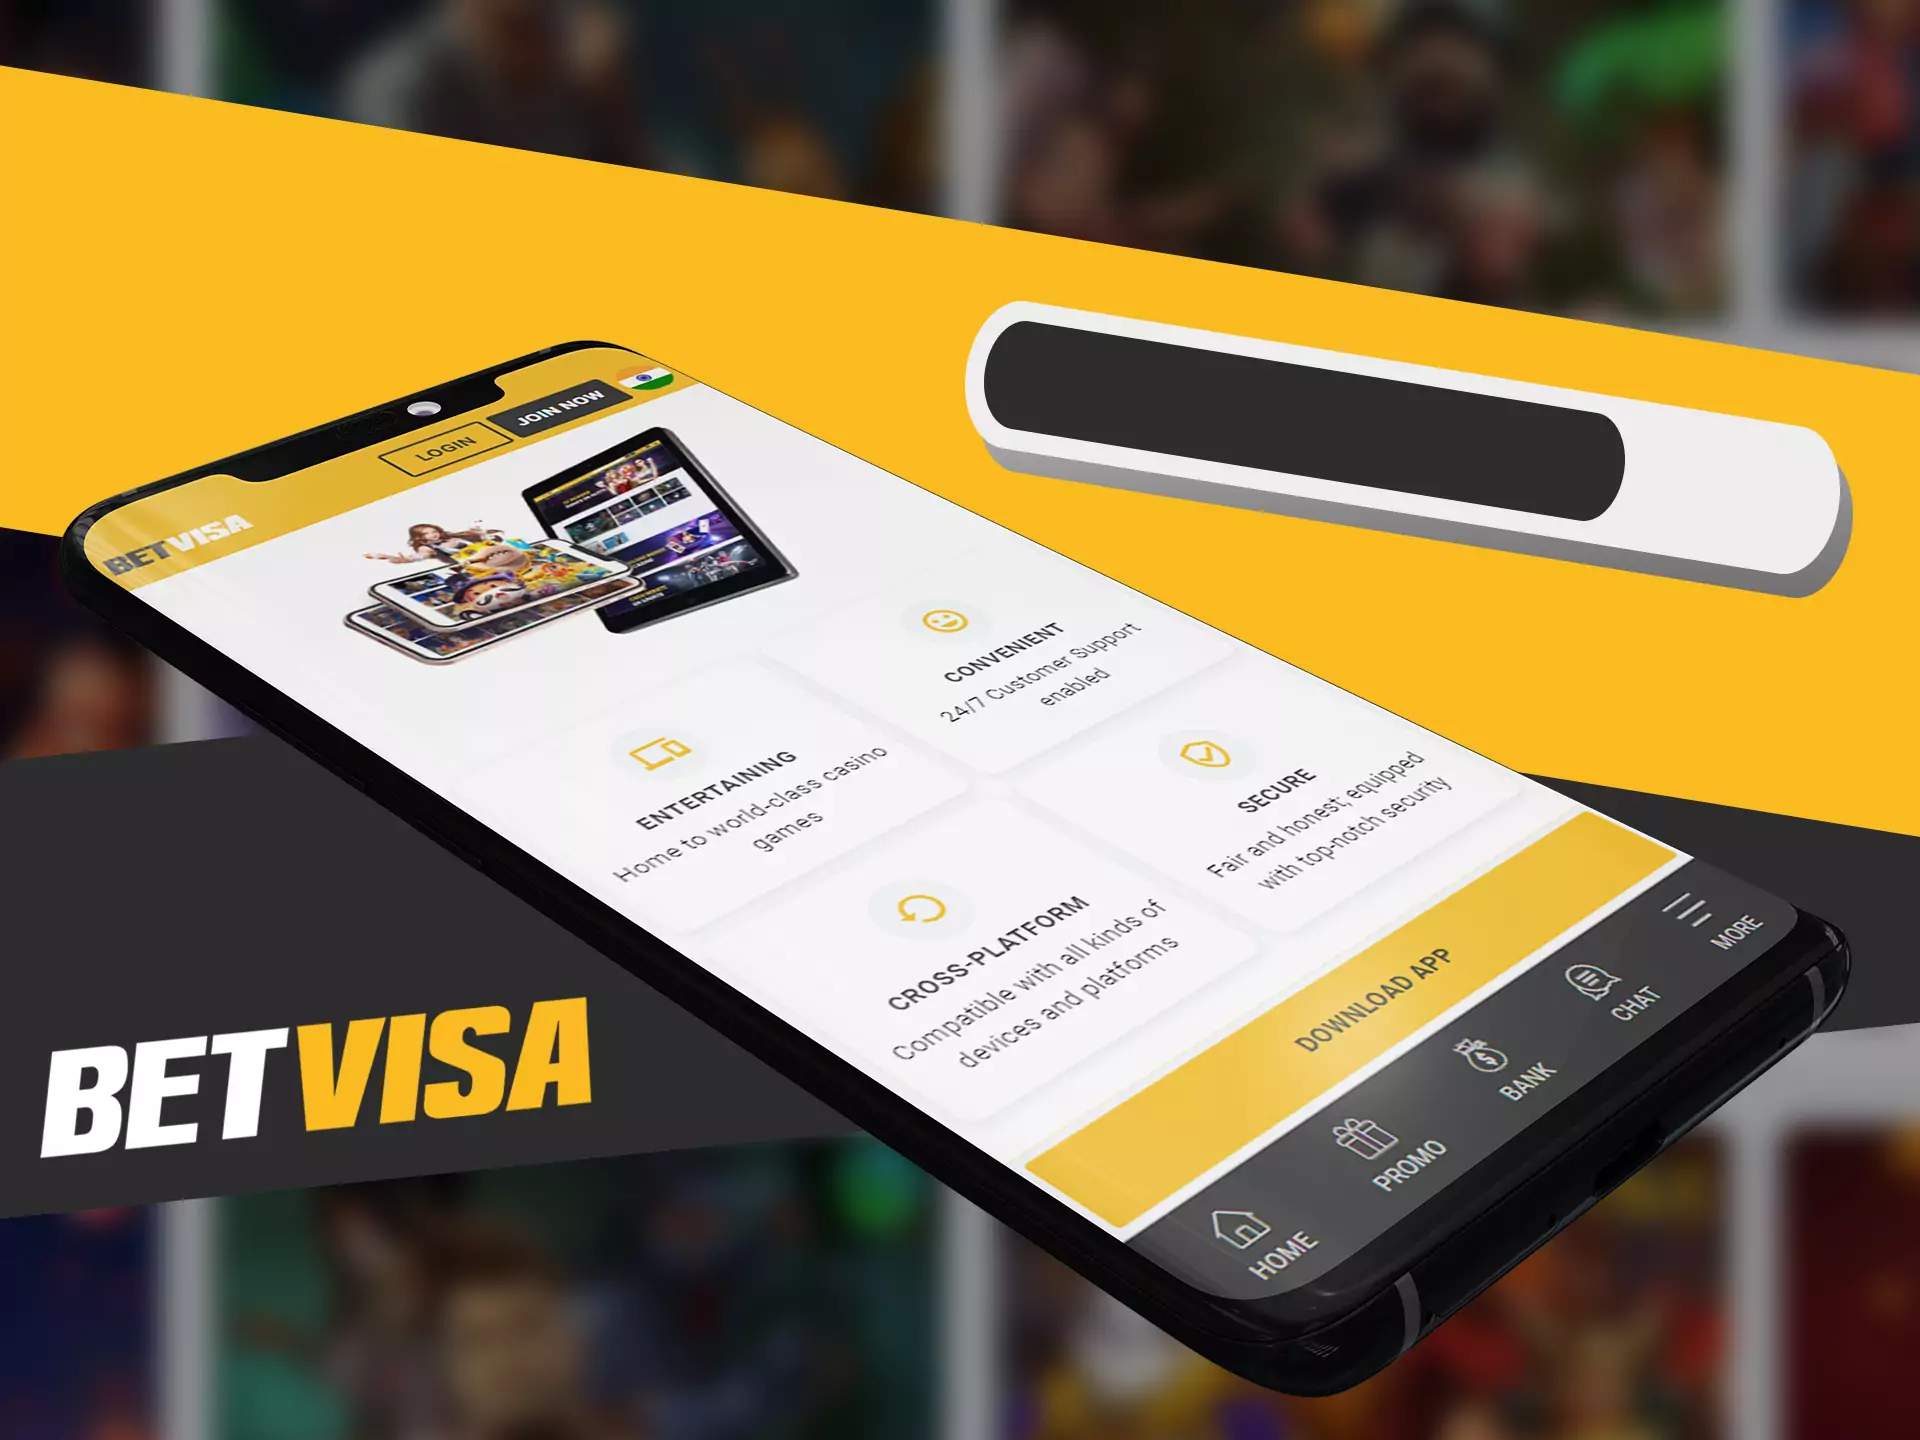 Betvisa app installs immedietly on your phone.